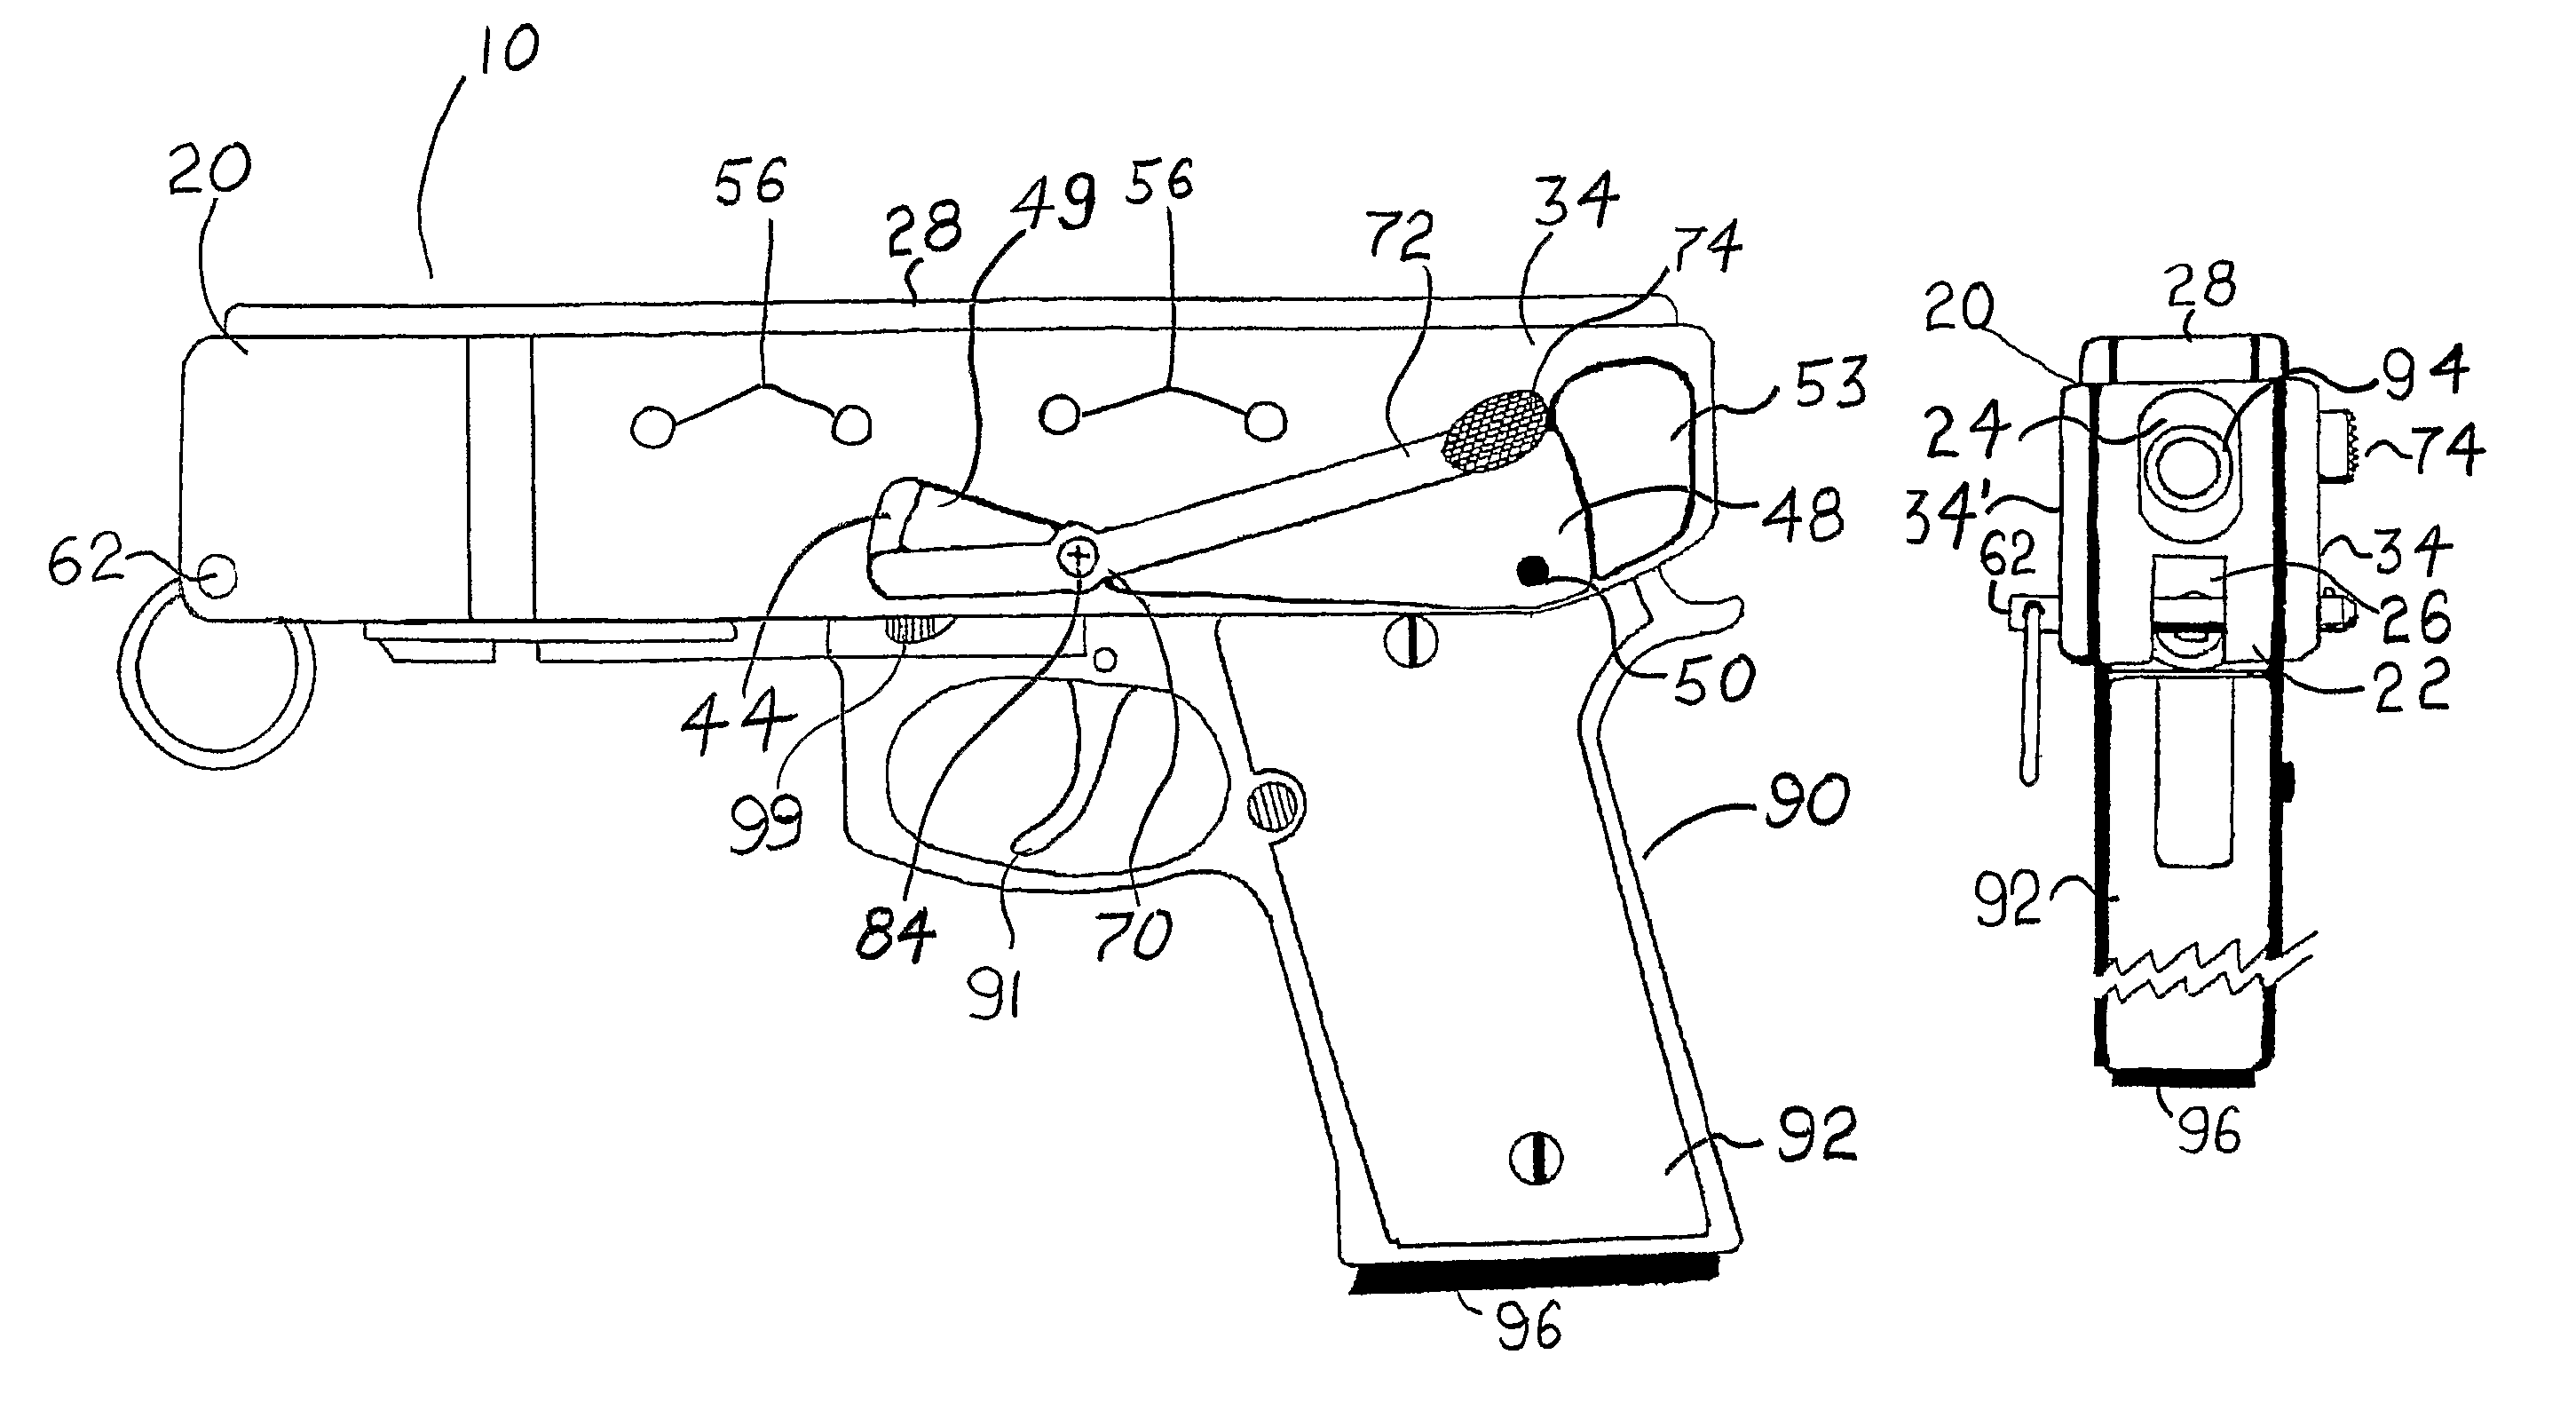 Security holster with locking lever